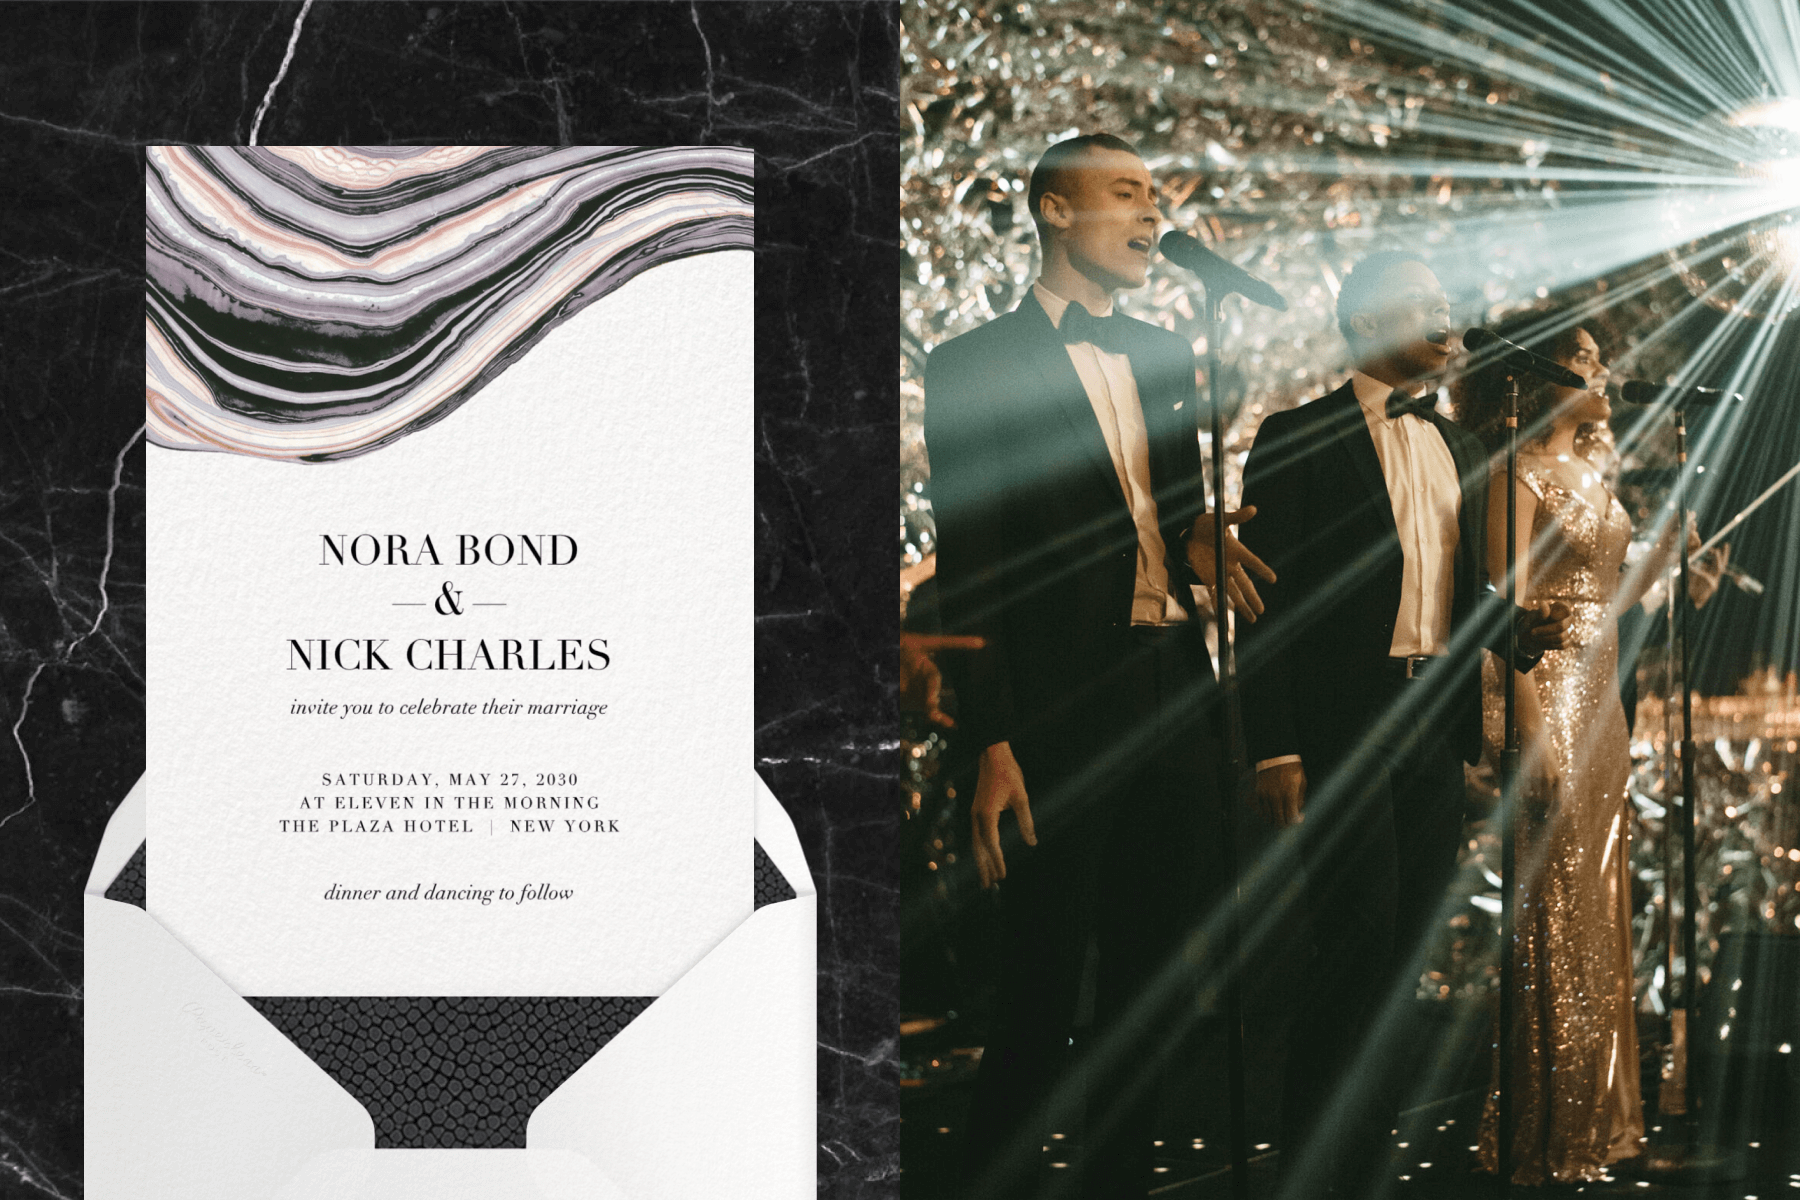 left: A white wedding invitation with a pink, purple, and black marbled pattern on the top on a black marble backdrop. Right: Three singers, two in tuxedos and one in a gold sequin gown, sing at microphones with a disco ball shining on them and a metallic backdrop.